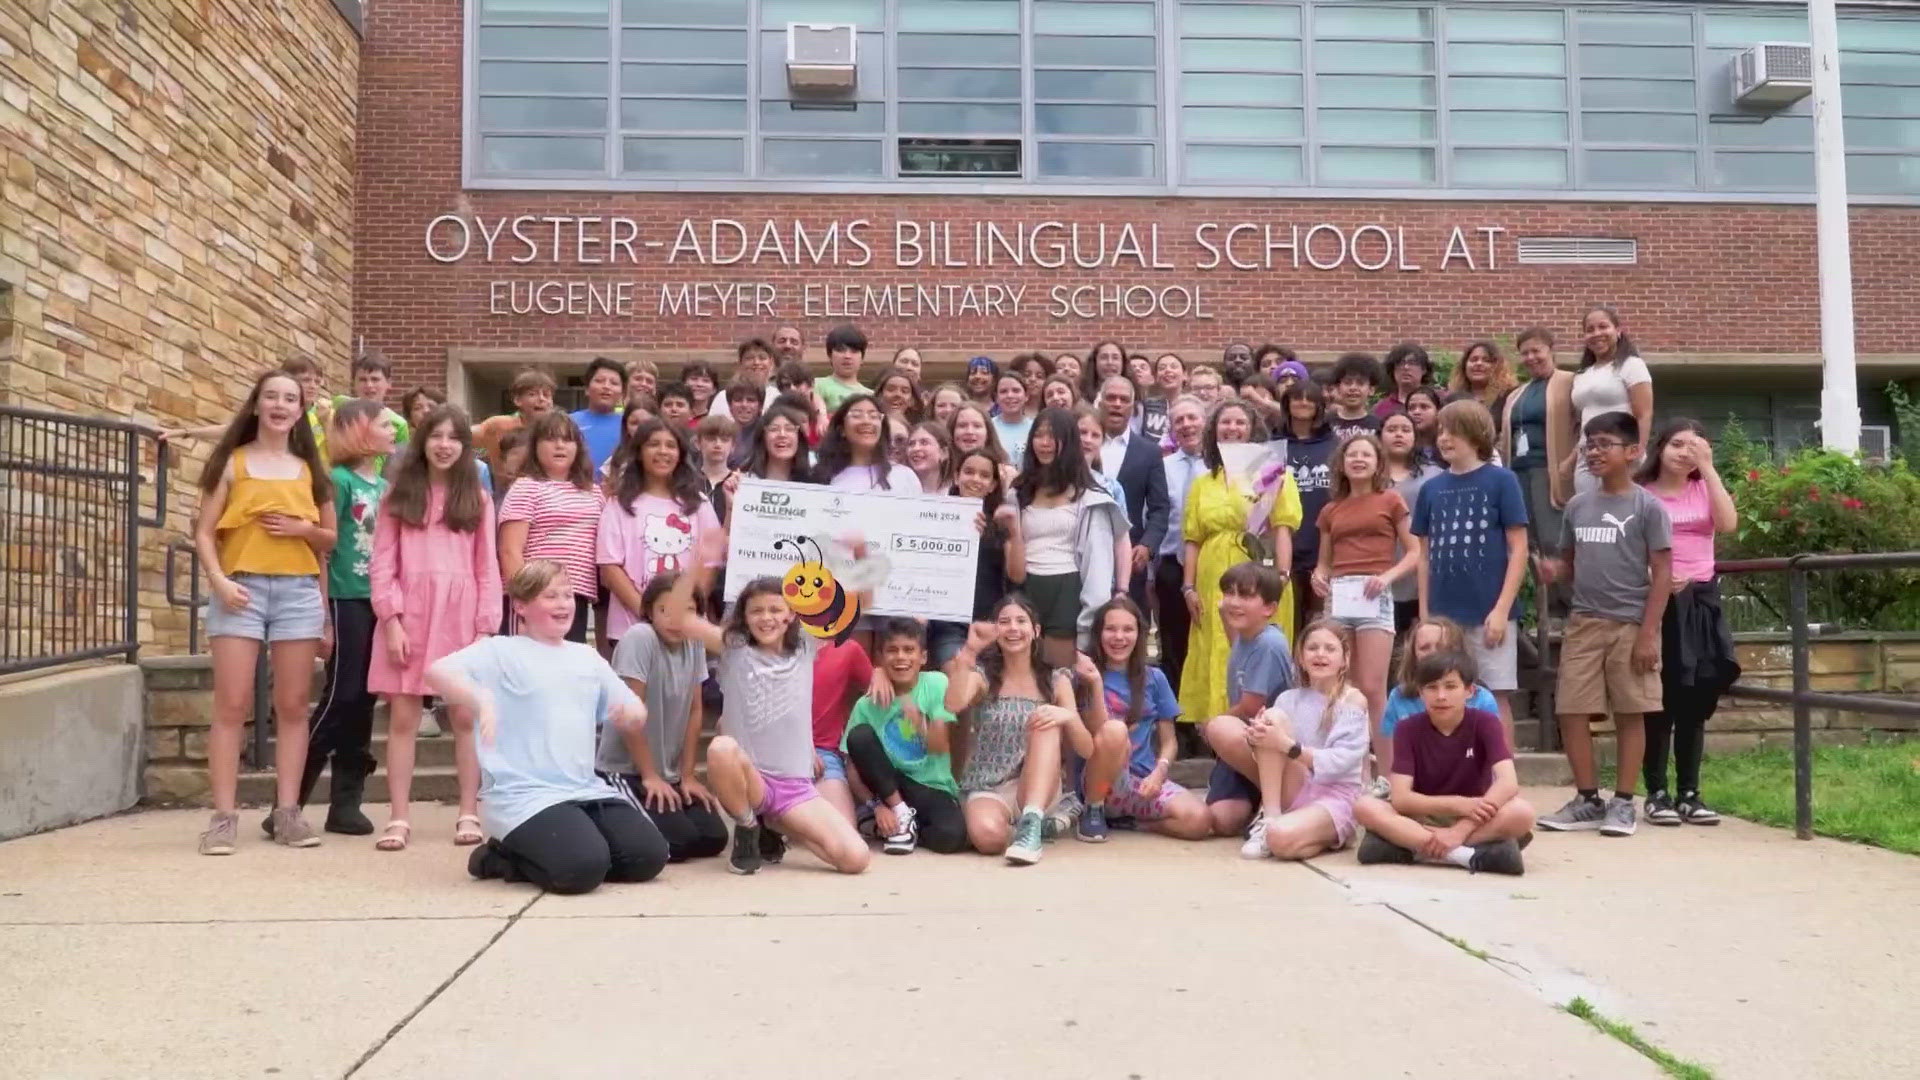 Chief Meteorologist Topper Shutt headed over to NW DC to surprise the folks at Oyster Adams Bilingual School.